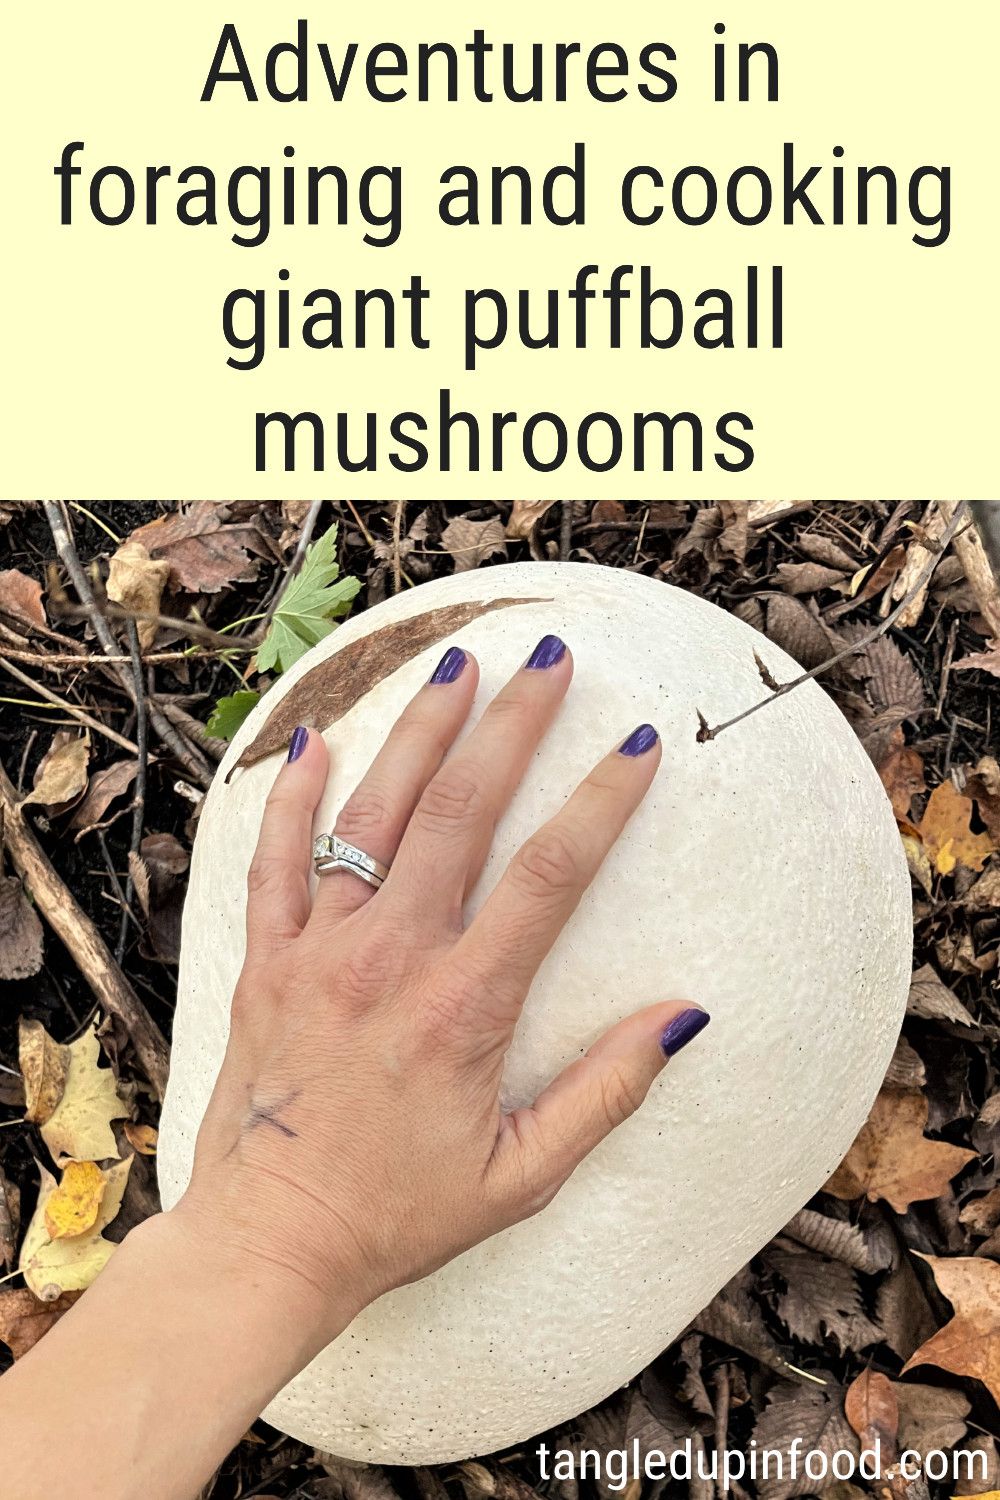 Hand on top of giant puffball mushroom with text reading "Adventures in foraging and cooking giant puffball mushrooms"